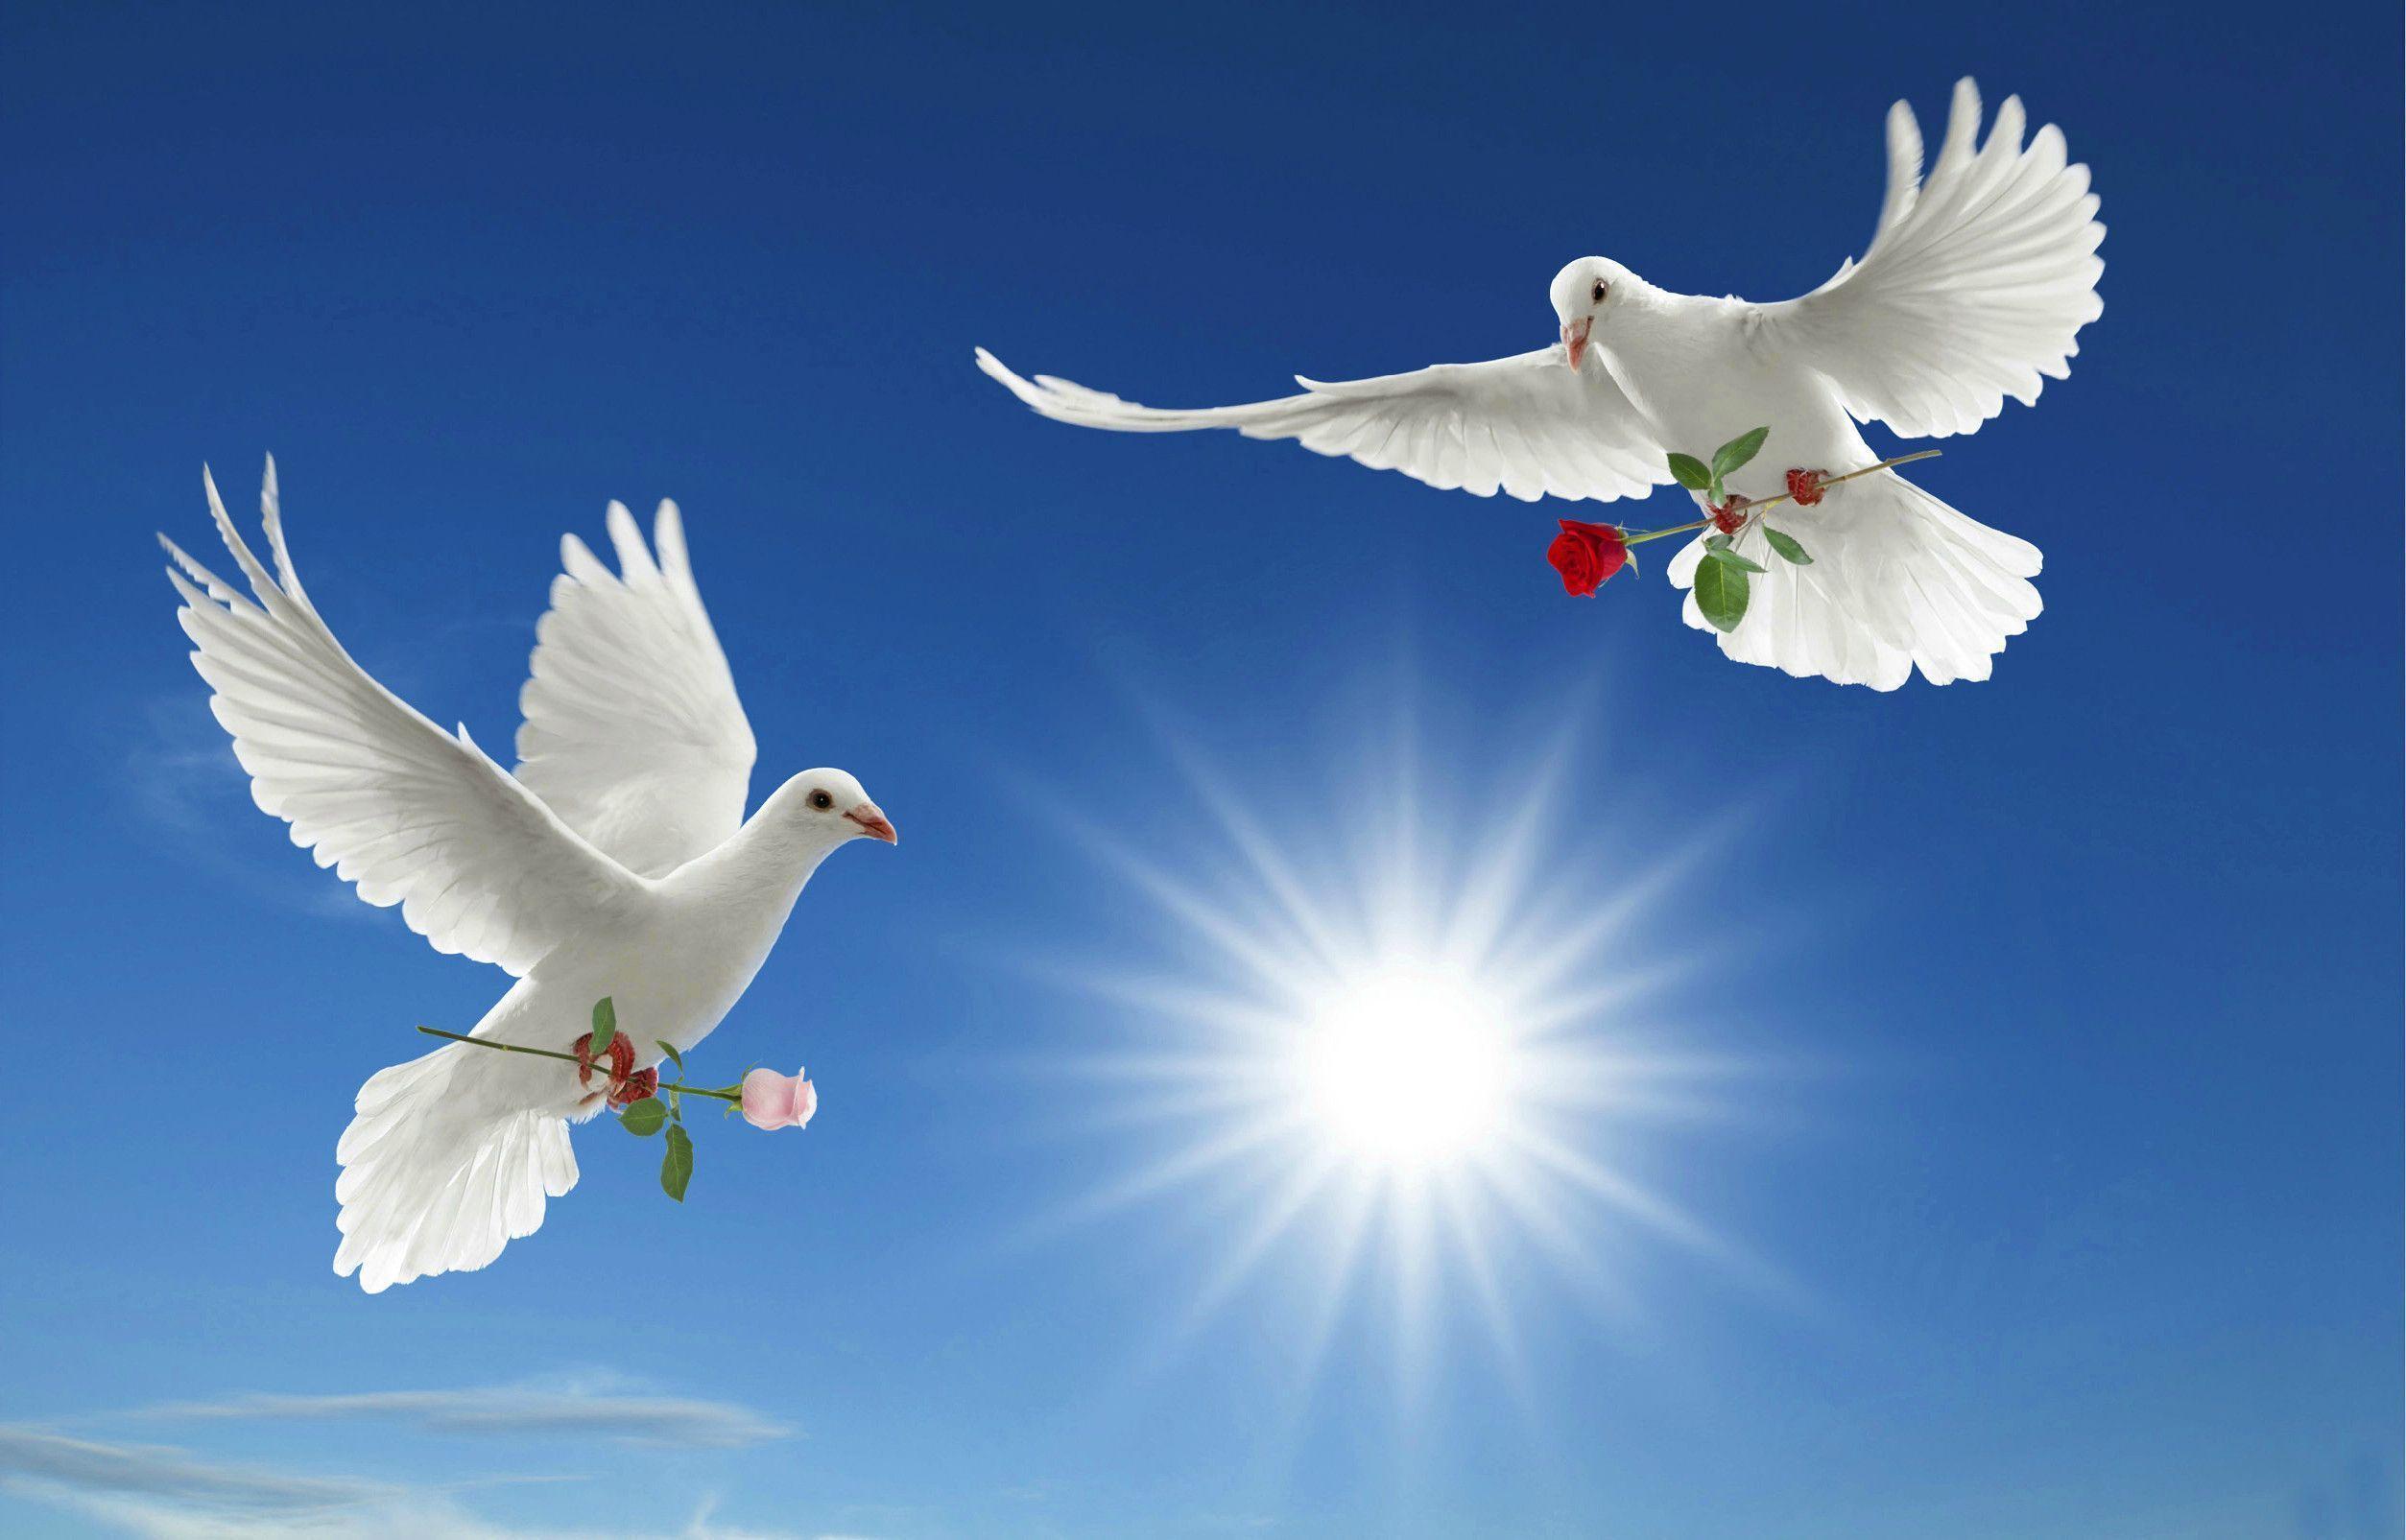 Two birds wallpaper love and peace full HD. High Quality PC